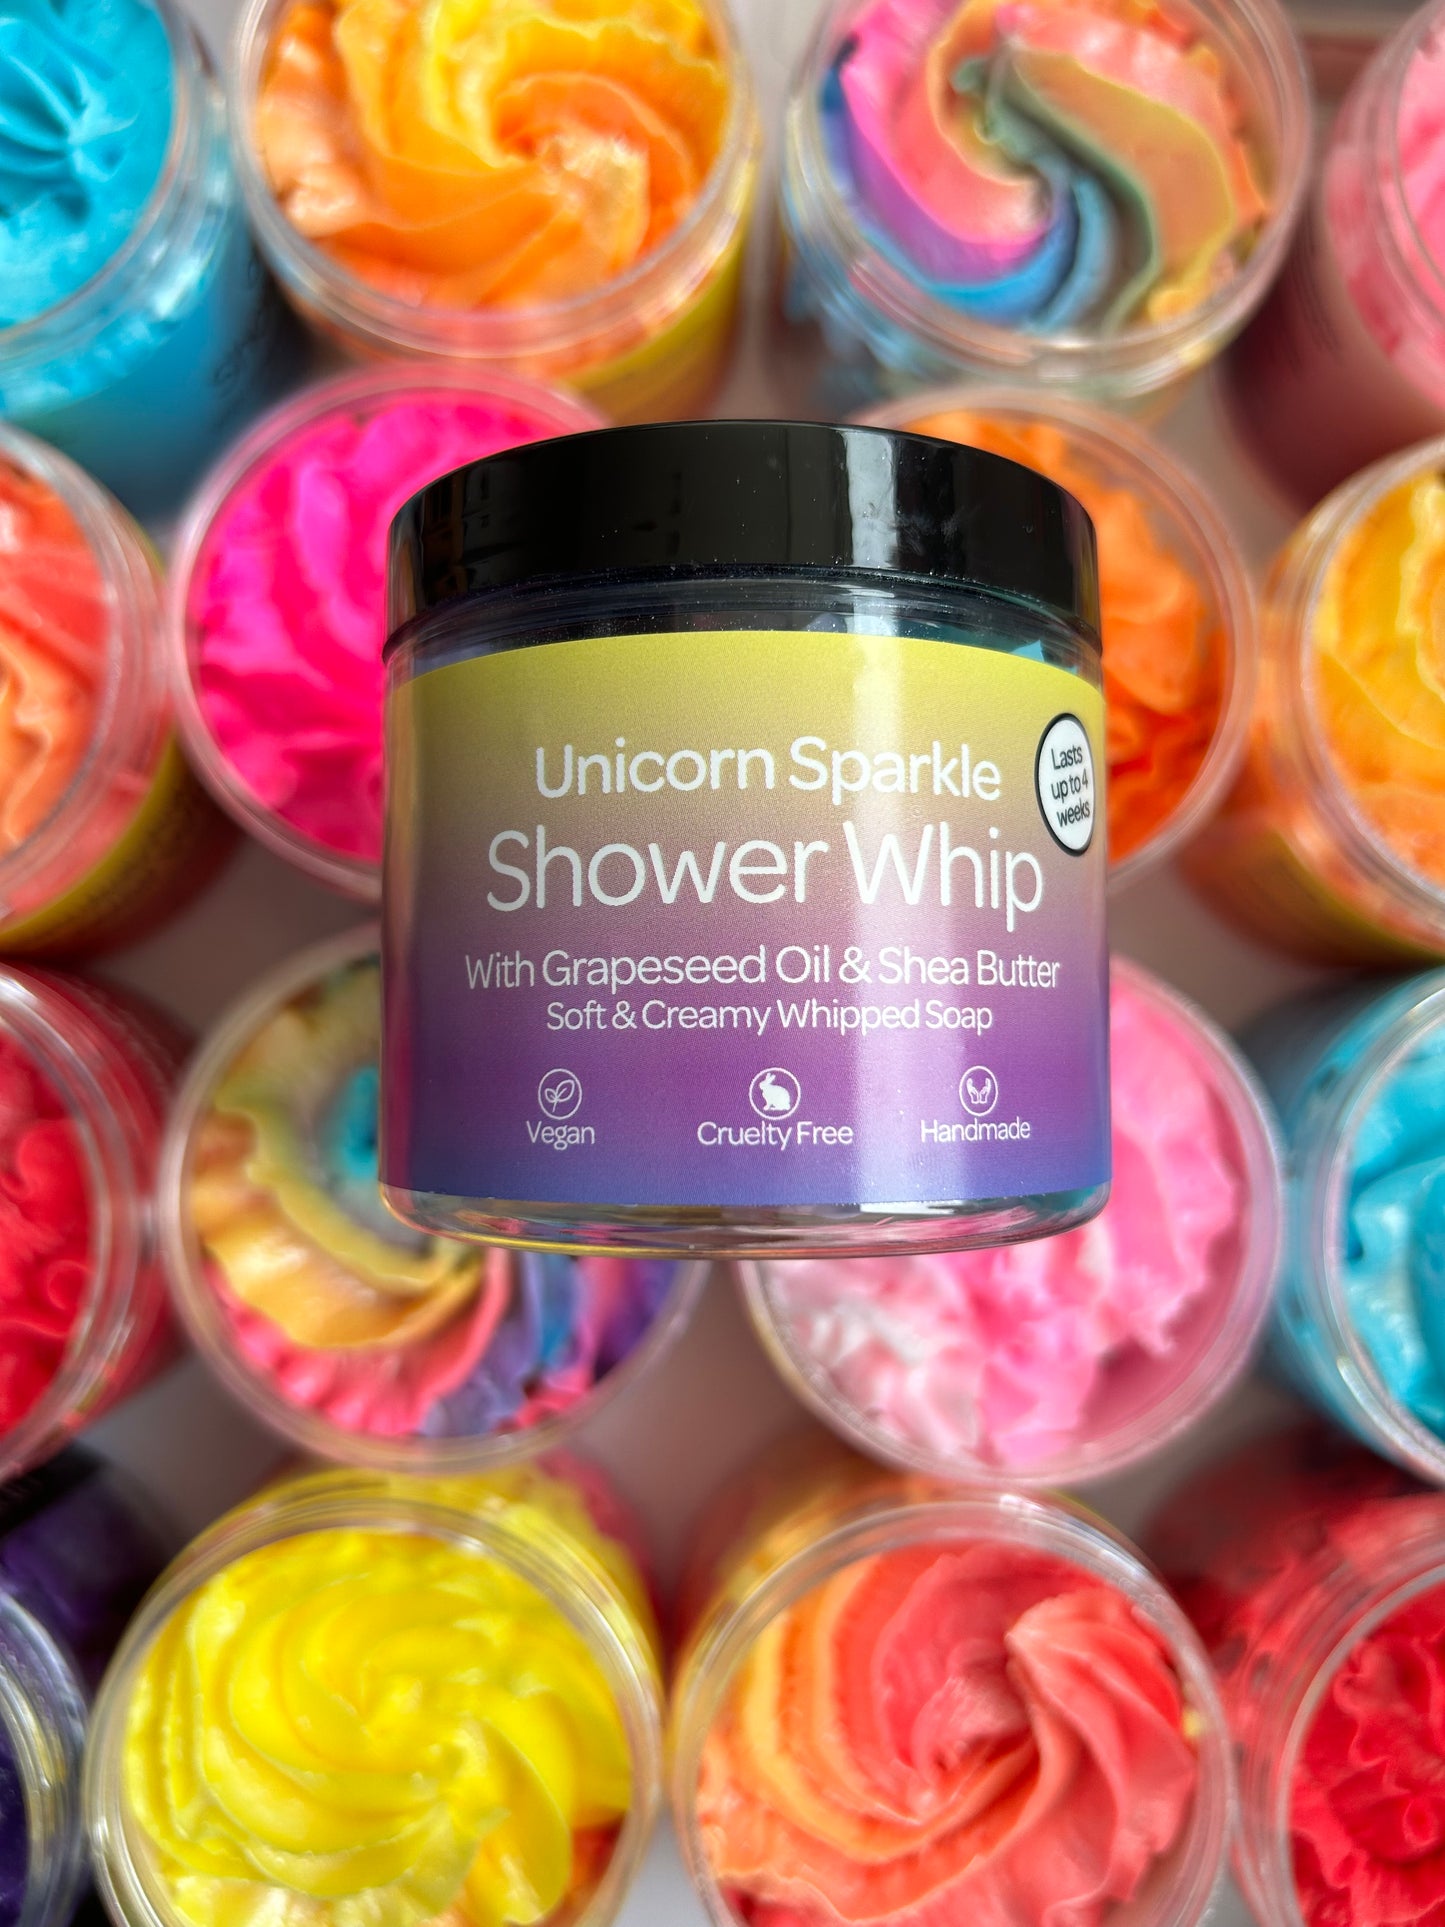 Whipped soaps